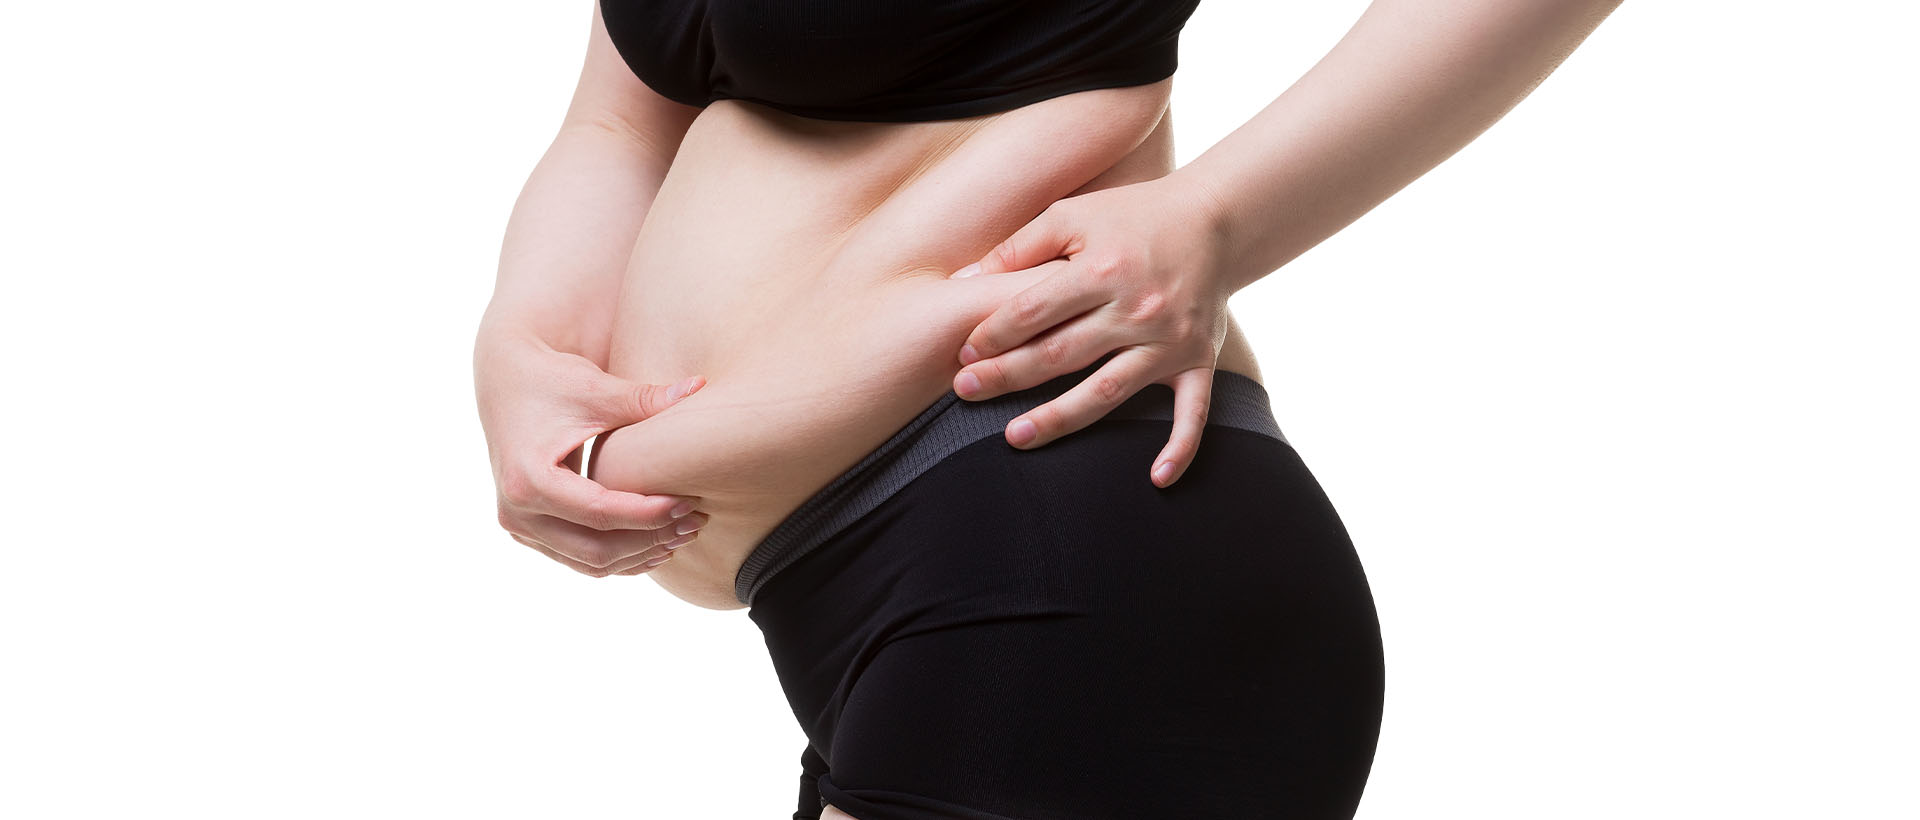 Who Is a Candidate For a Drainless Tummy Tuck?